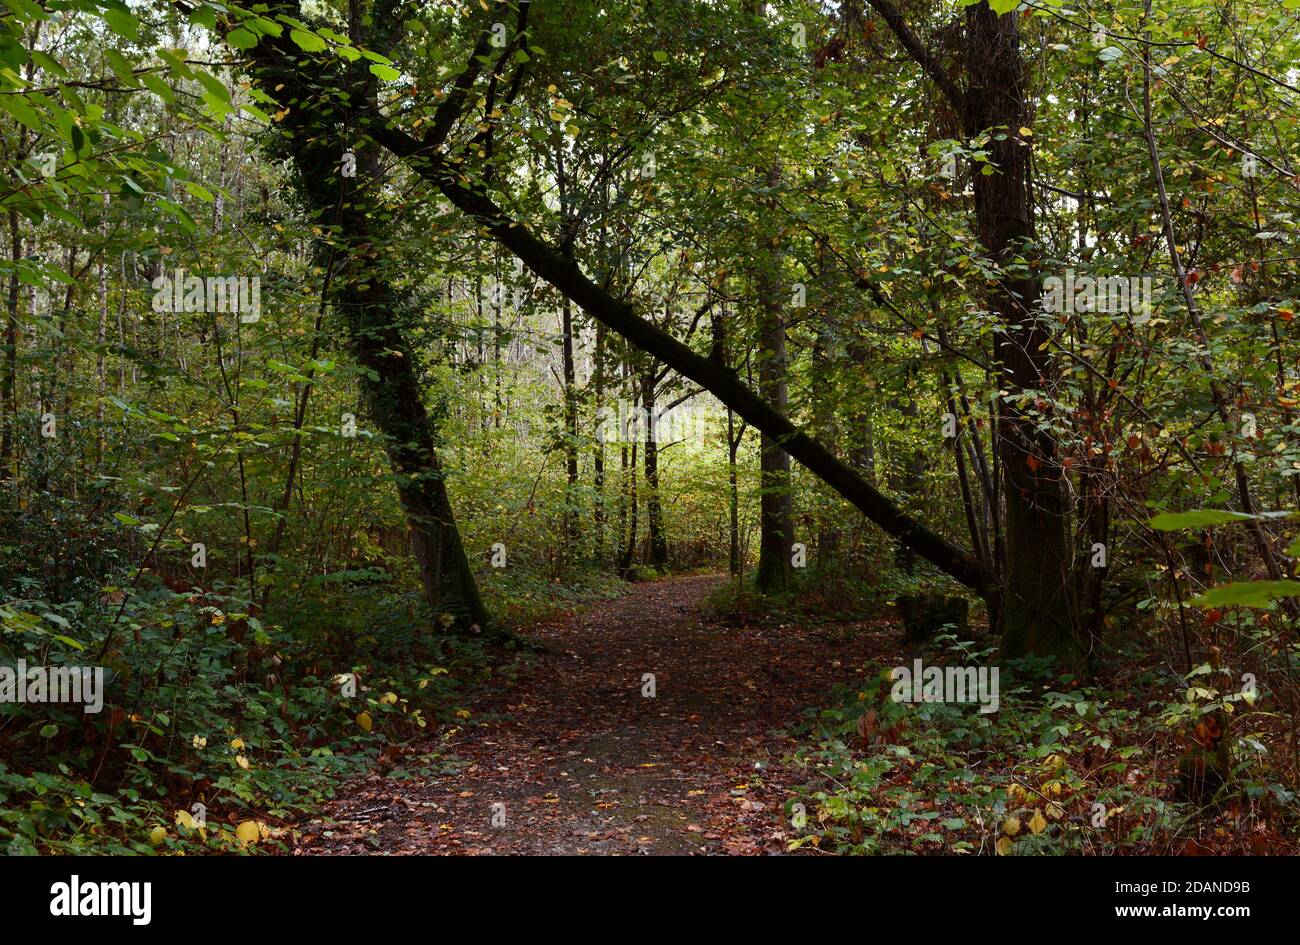 Woodland path leads through trees and undergrowth in early autumn. A large fallen oak leans across the pathway. Stock Photo